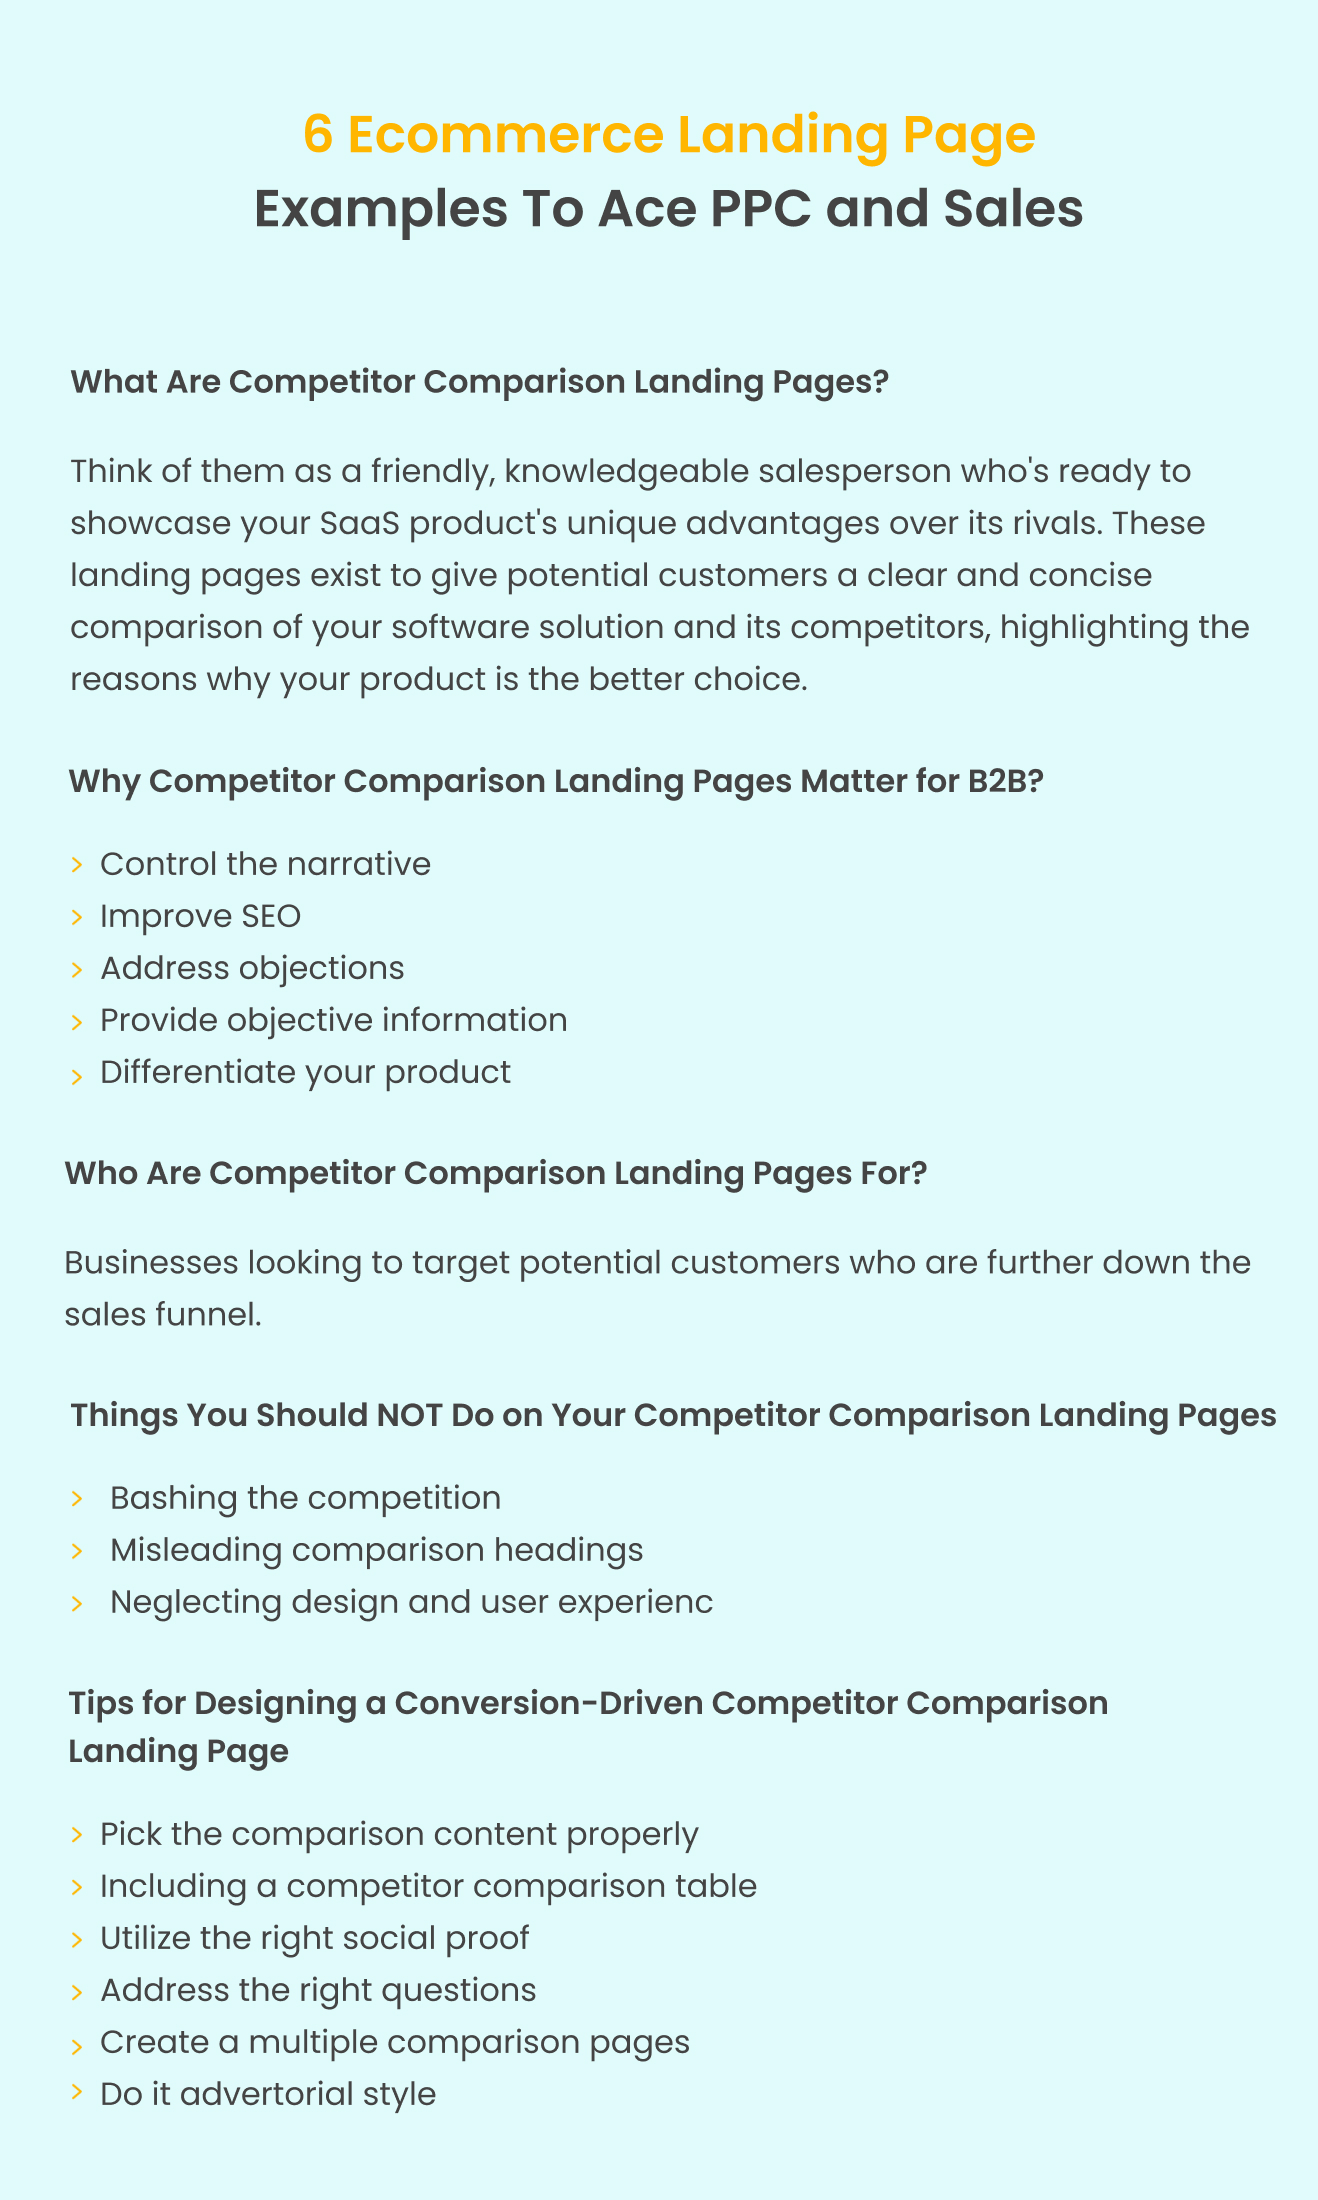 Competitor-Comparison-Landing-Pages-Tips-Examples-For-SaaS-Summary.webp